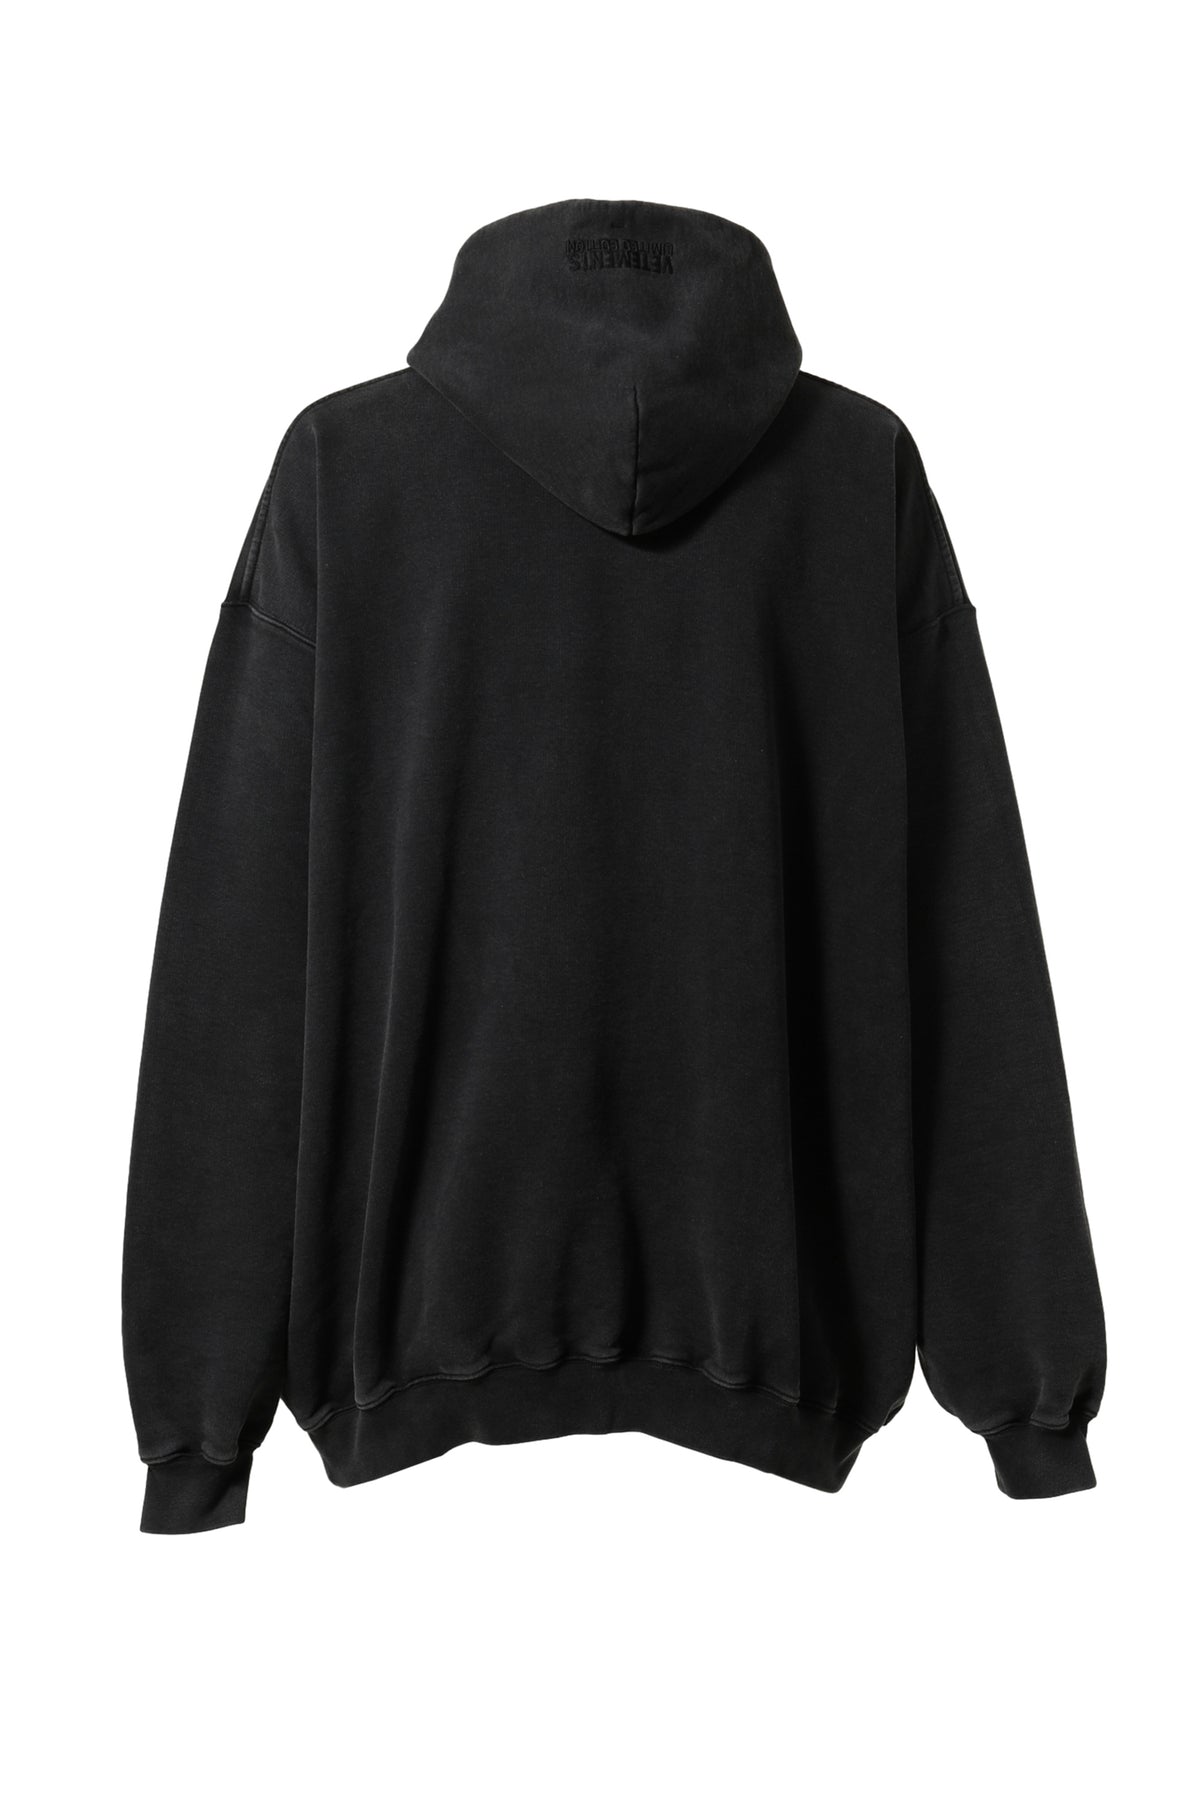 LIMITED EDITION LOGO HOODIE / BLK